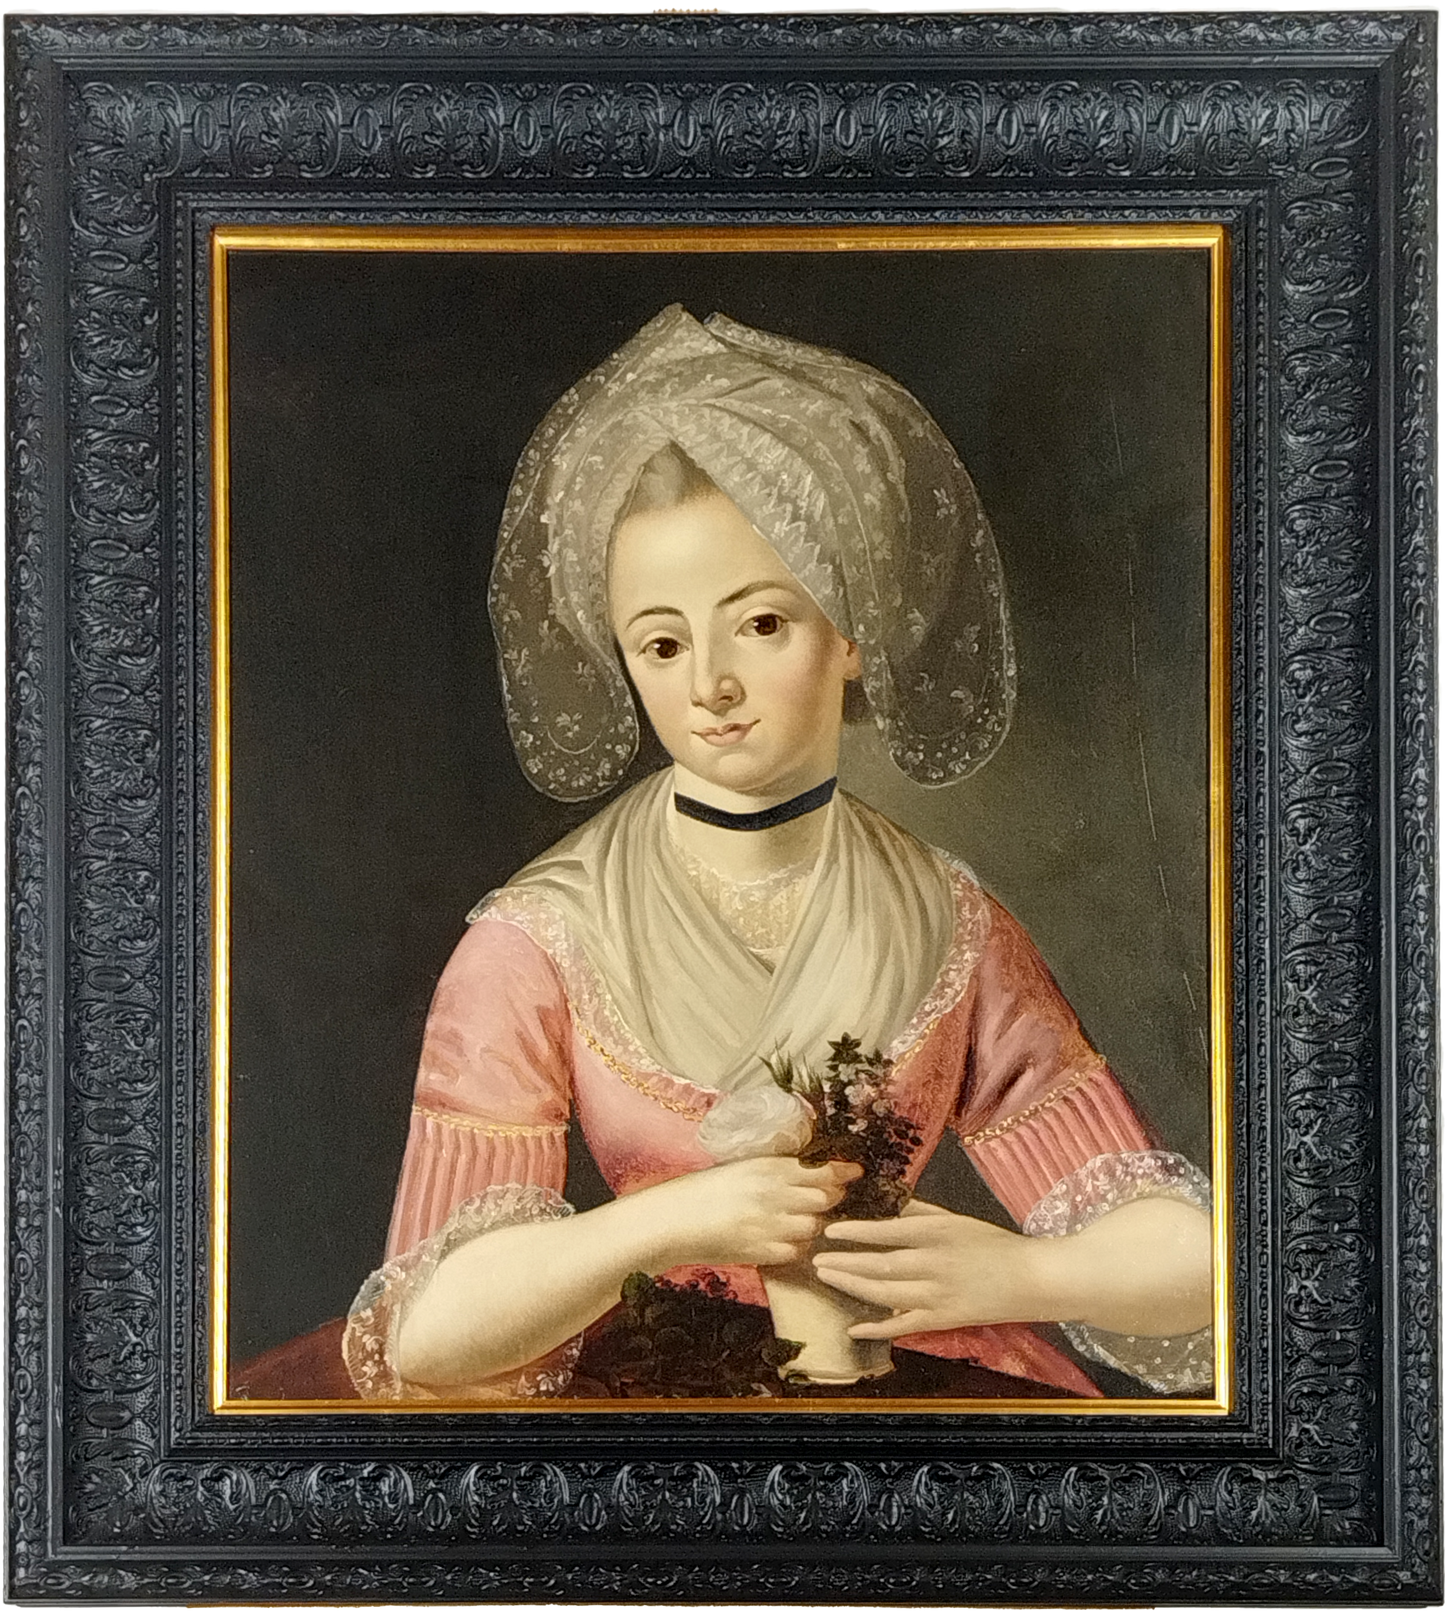 AN 18th CENTURY PORTRAIT OF A YOUNG LADY IN PINK HOLDING A POSY OF FLOWERS, OIL ON CANVAS,  IMAGE 55 x 85cm, CUSTOM MADE FRAME 73 x 84cm.